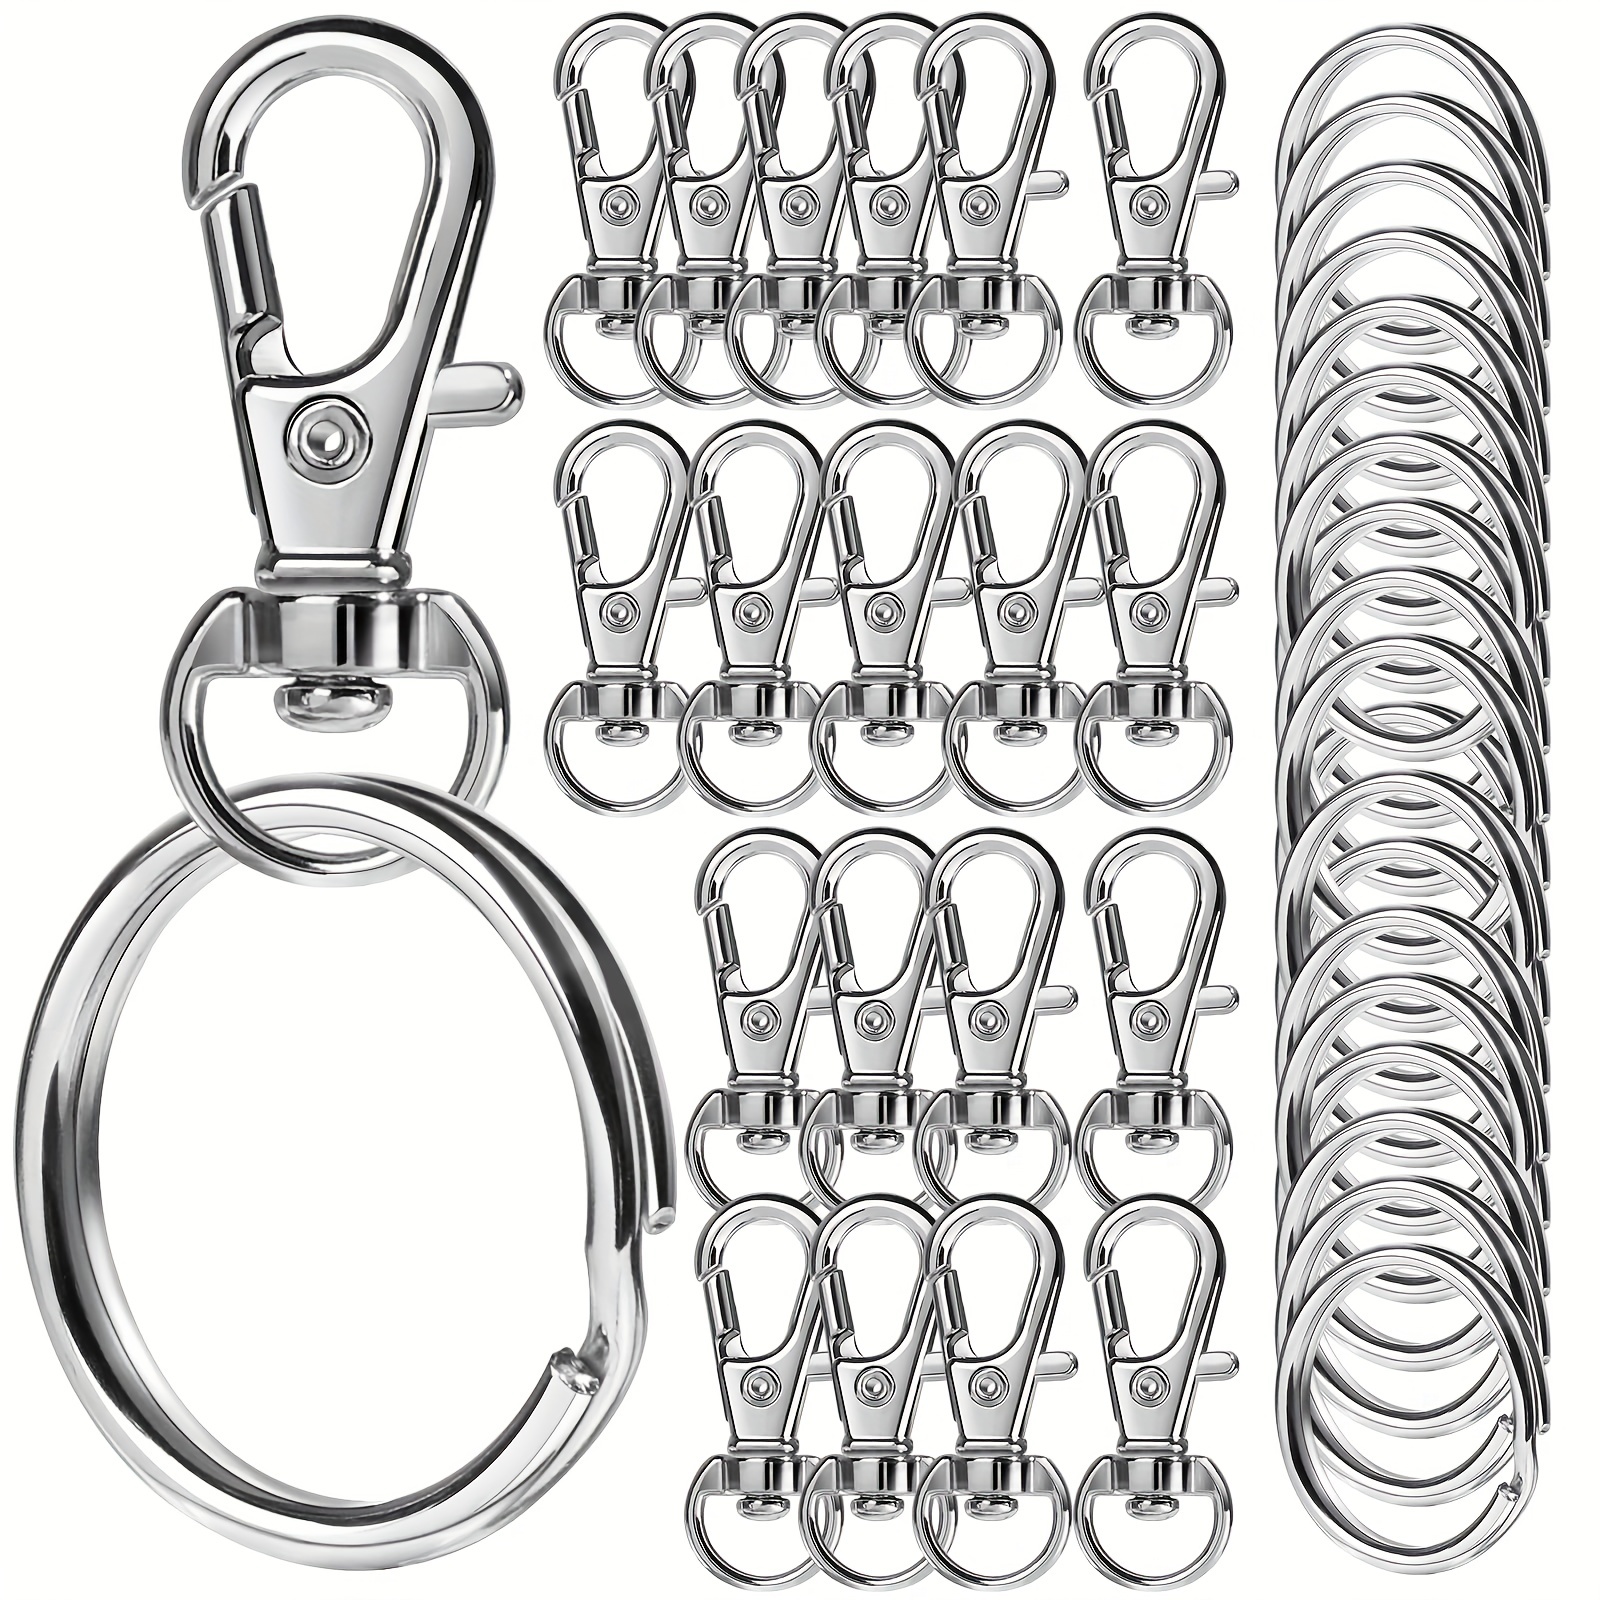 110pcs Key Chain Rings Set For Diy Crafts Including Lobster Clasps, Jump  Rings, Key Ring, For Keychain Making